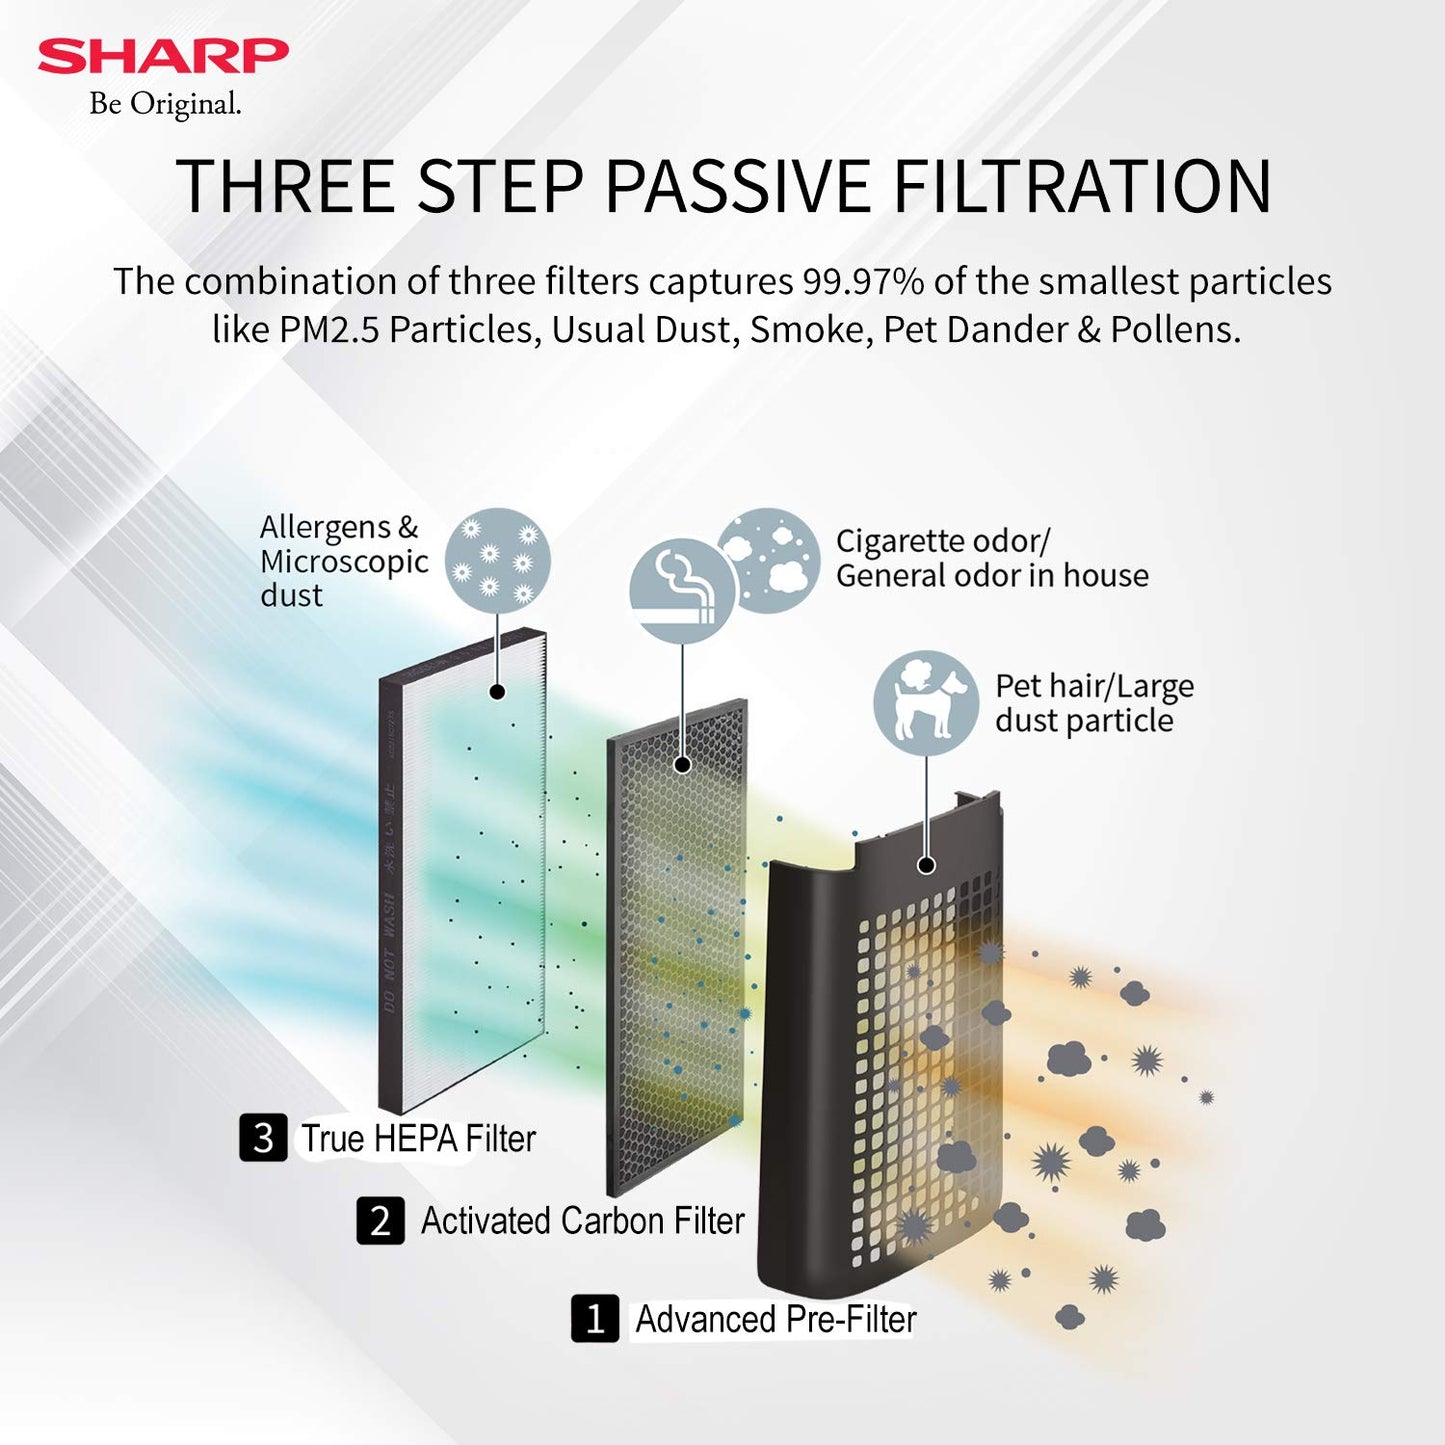 Sharp Air Purifier & Dehumidifier for Homes, Rooms, Offices | Awarded Plasmacluster Tech. | True HEPA H14 (in E1822 type) & Activated Carbon Filter | Auto Dehumidification | PM2.5 Indicator | Model: DW-J20FM-W